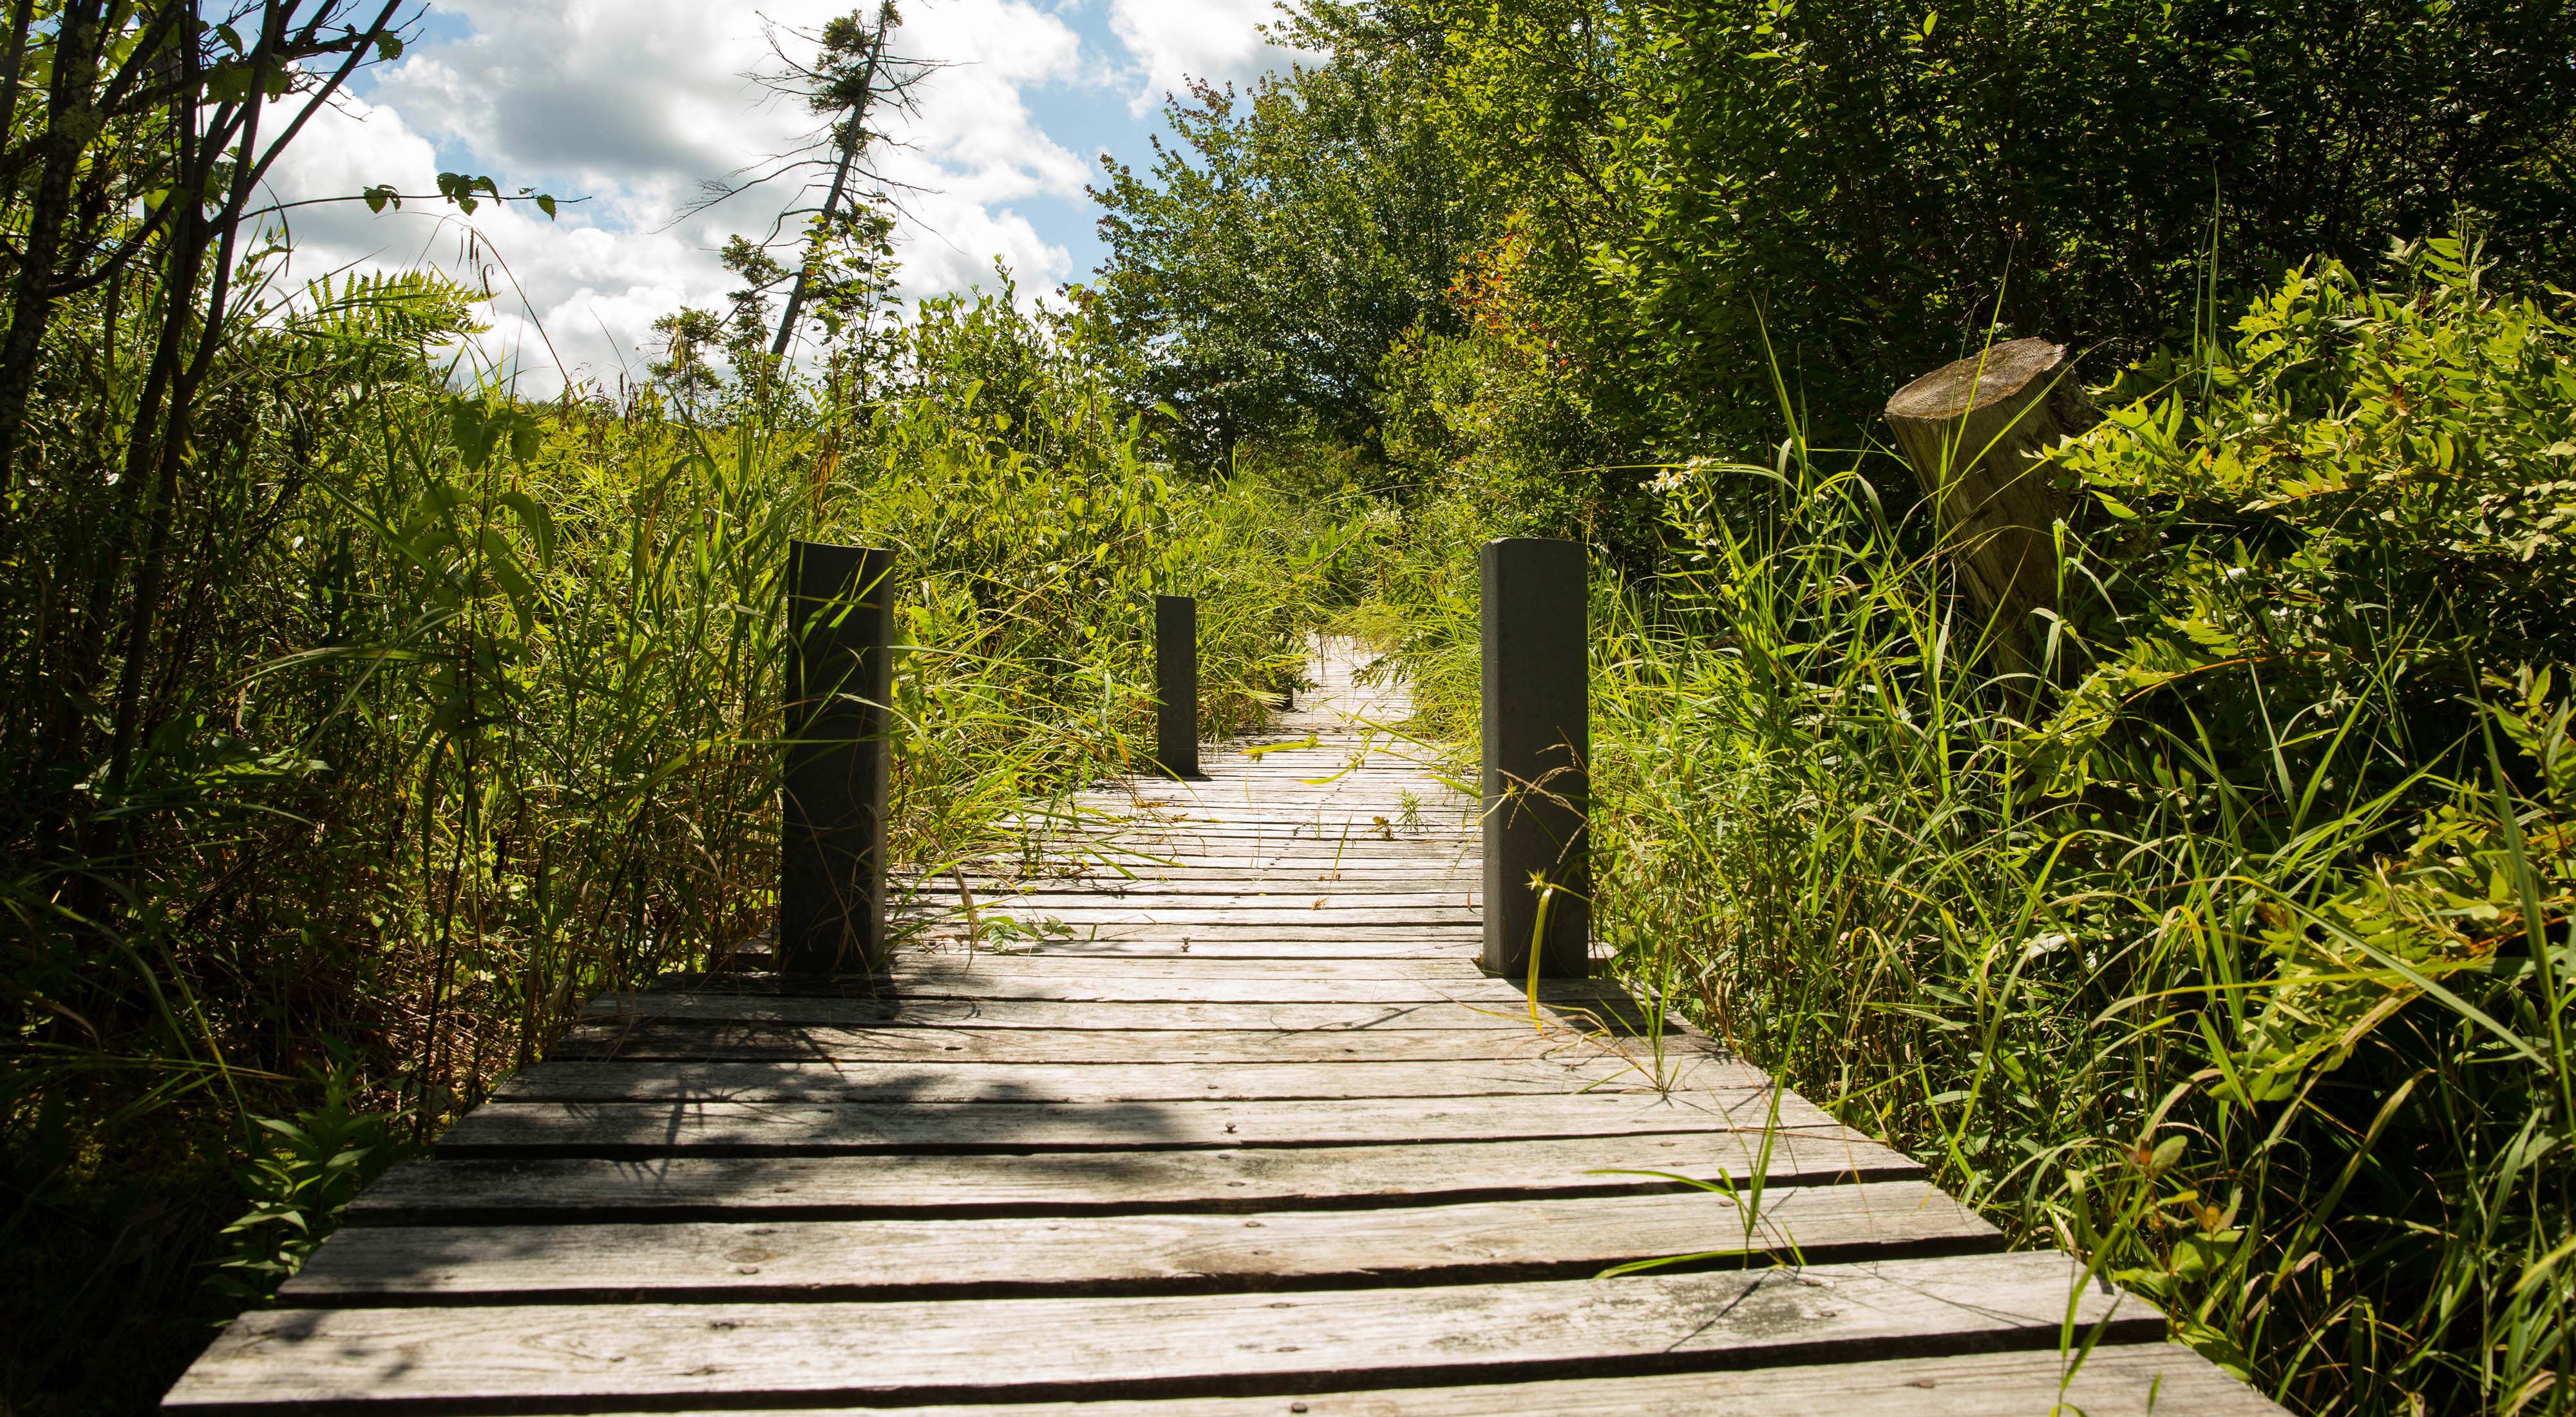 A boardwalk extends into lush, green bog and forest.